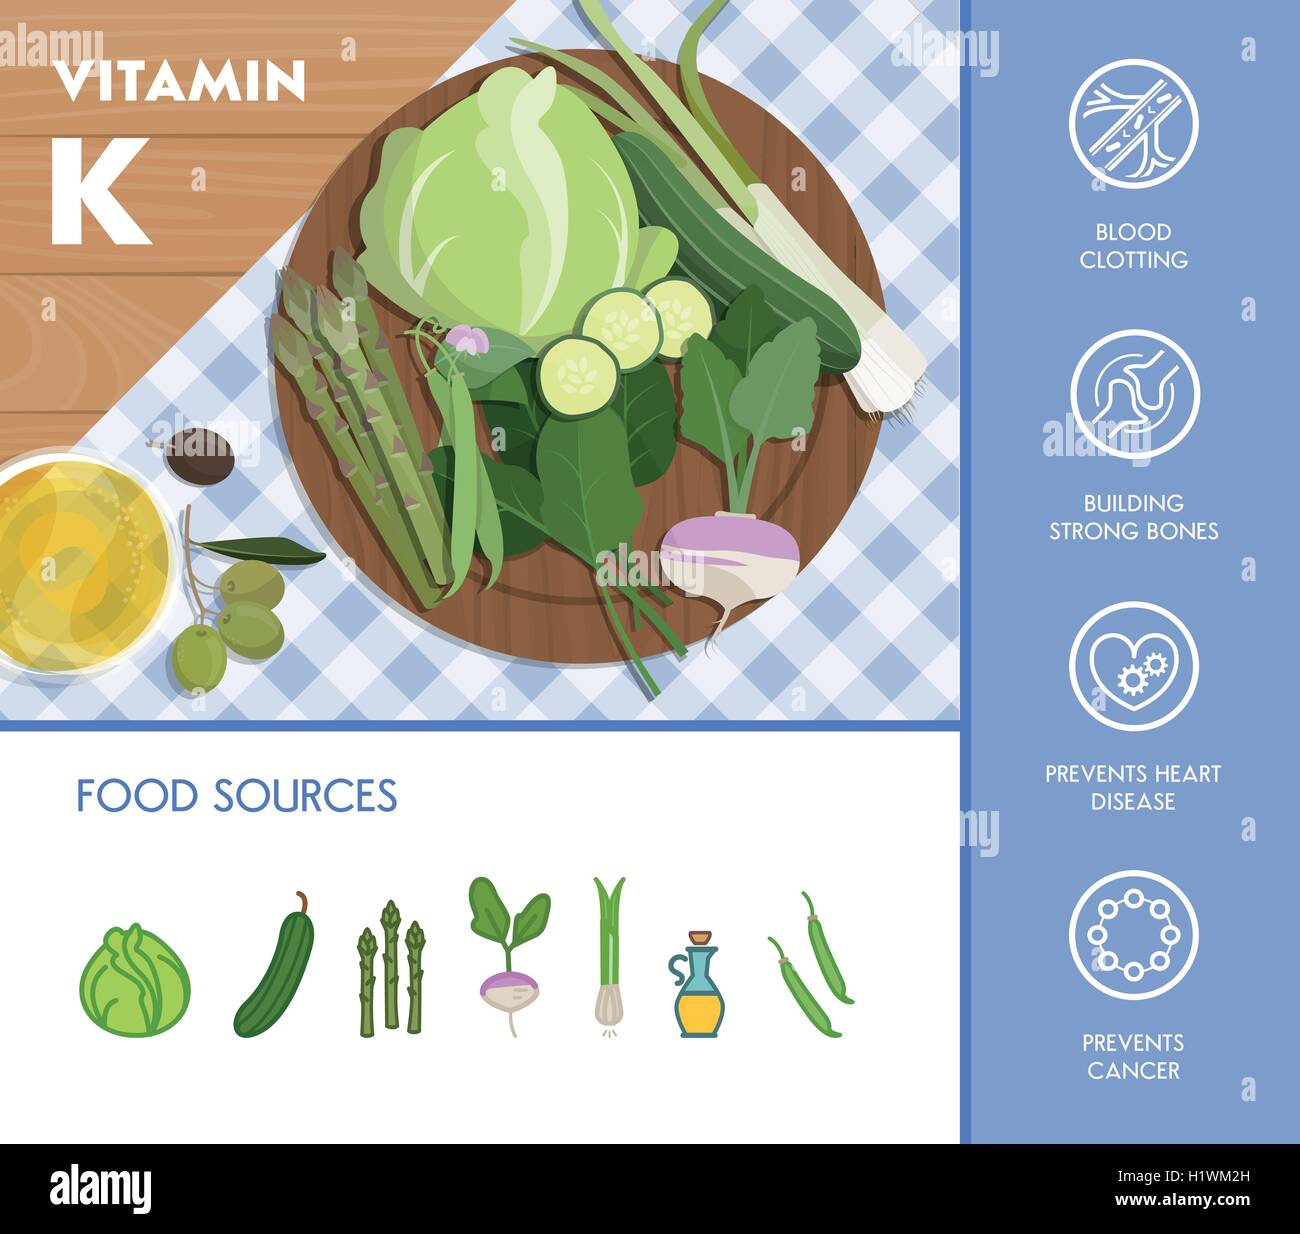 Vitamin K food sources and health benefits, vegetables composition on a chopping board and icons set Stock Vector